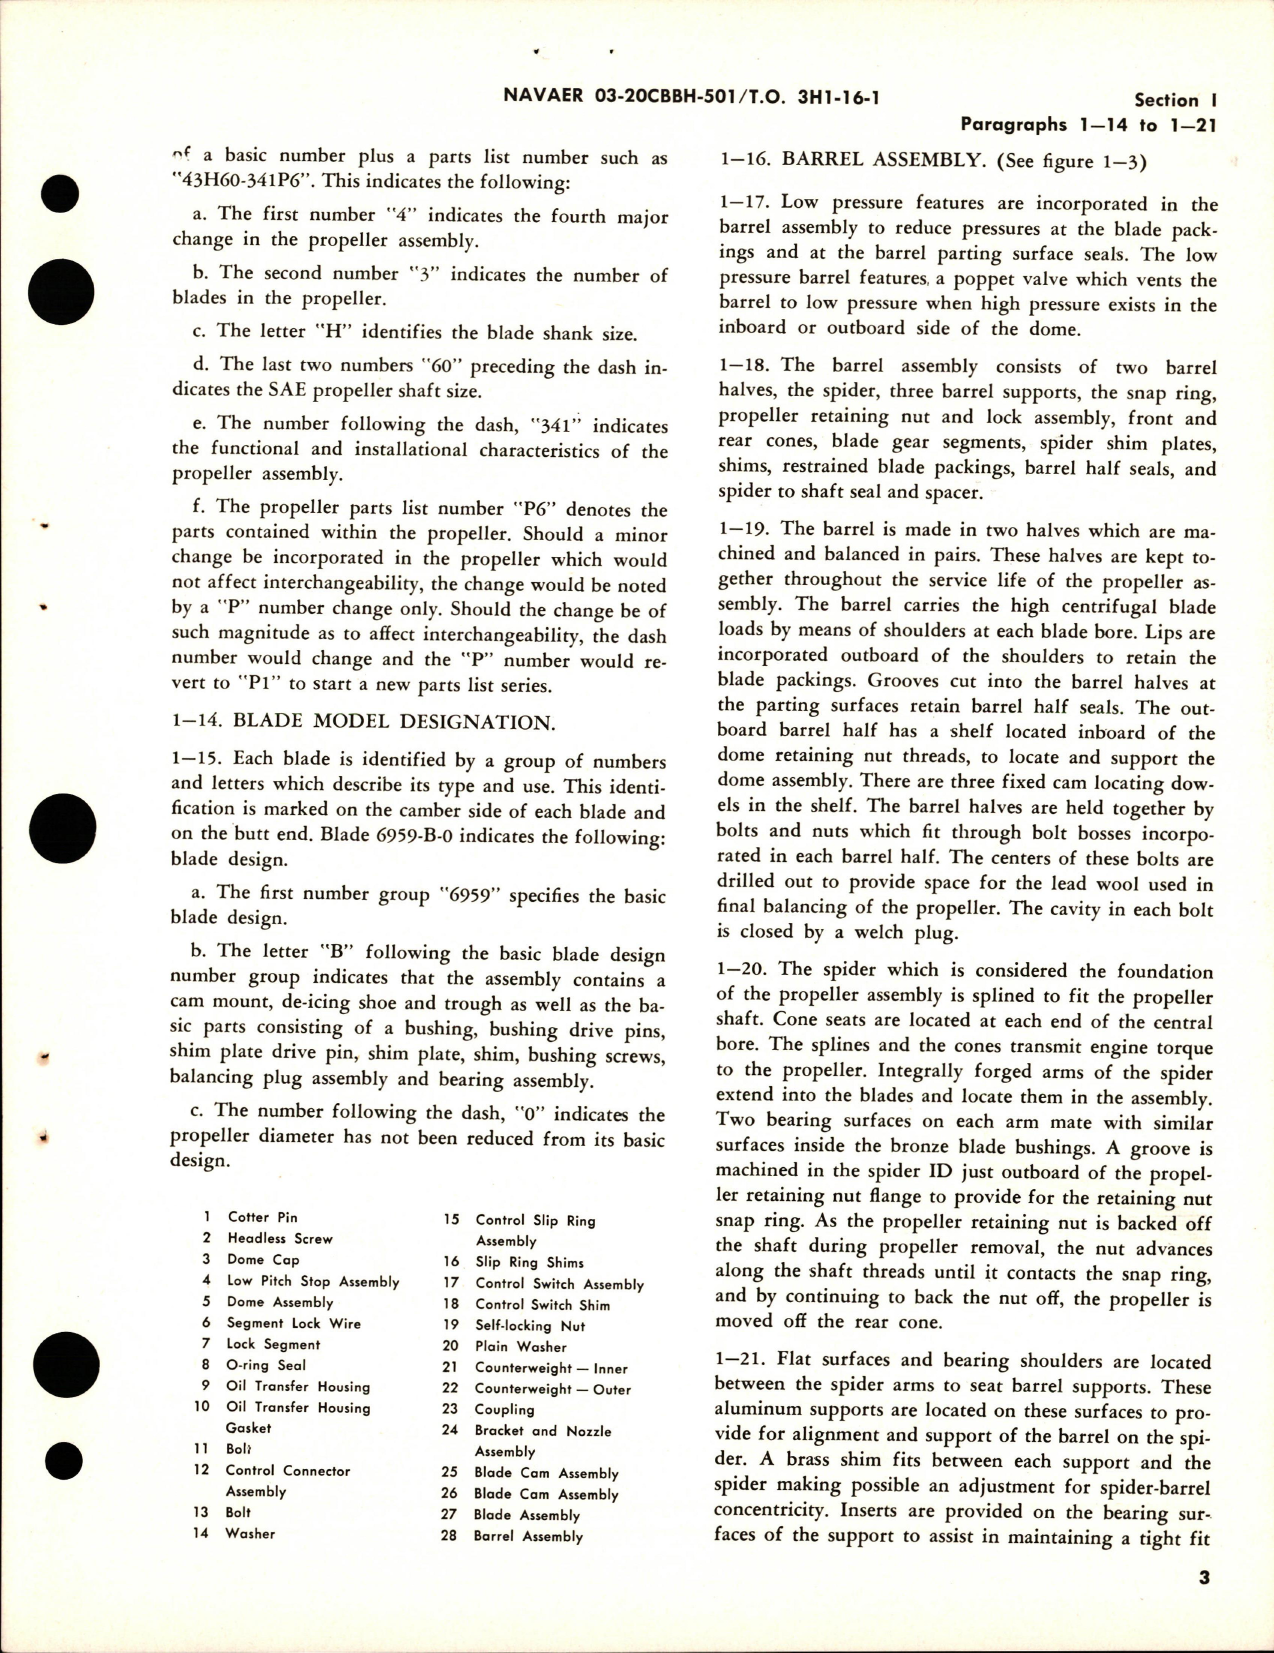 Sample page 7 from AirCorps Library document: Operation and Service Instructions for Variable Pitch Propeller - Model 43H60-341